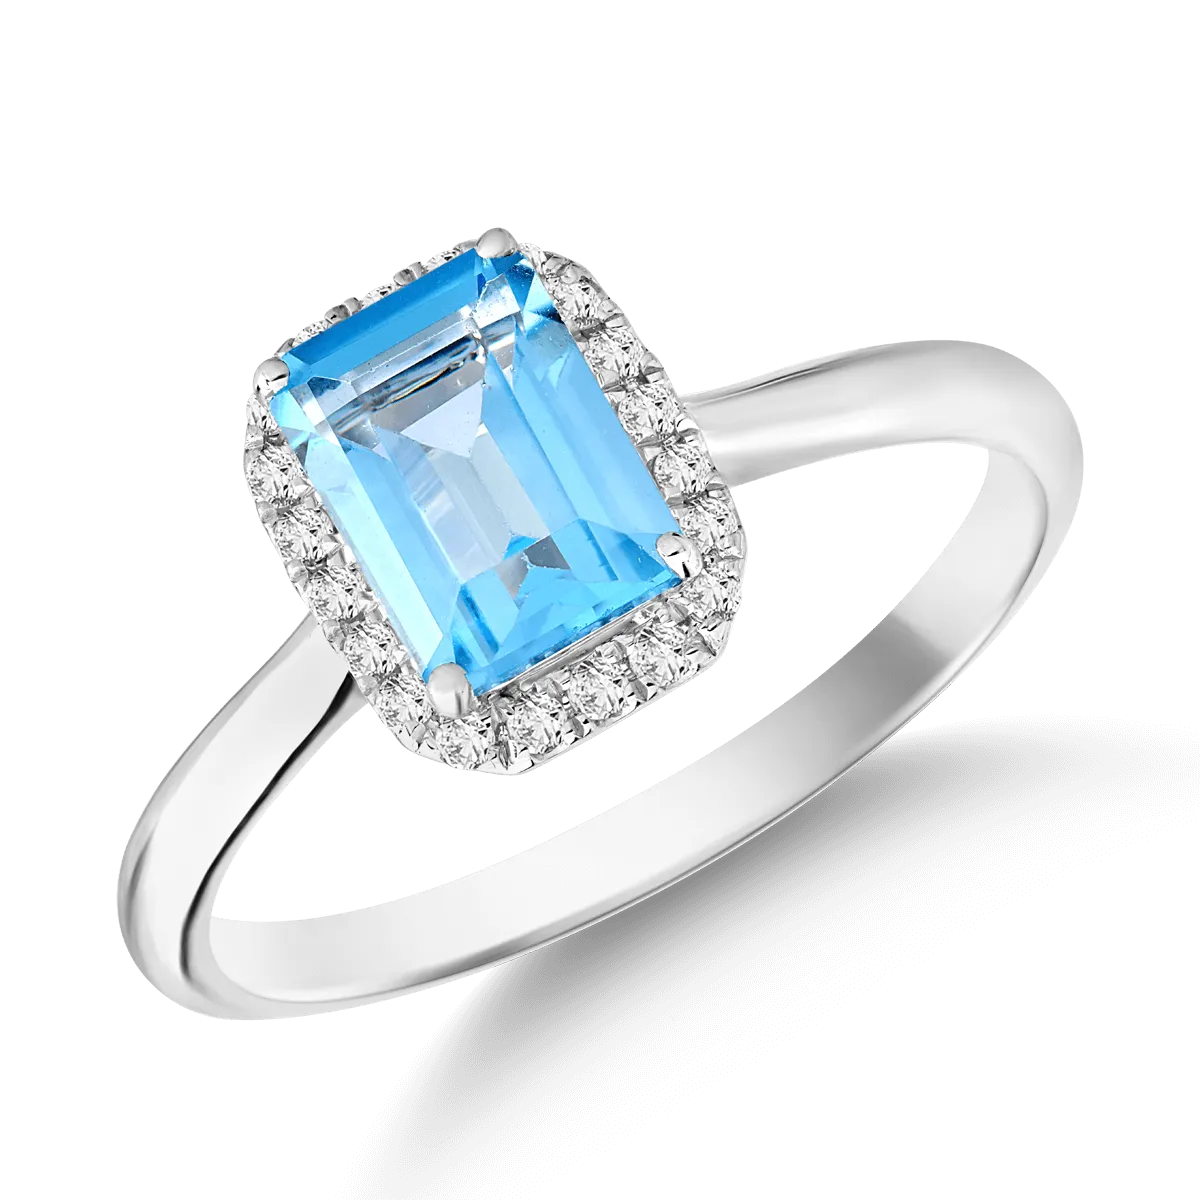 18K white gold ring with 1.23ct blue topaz and 0.1ct diamonds